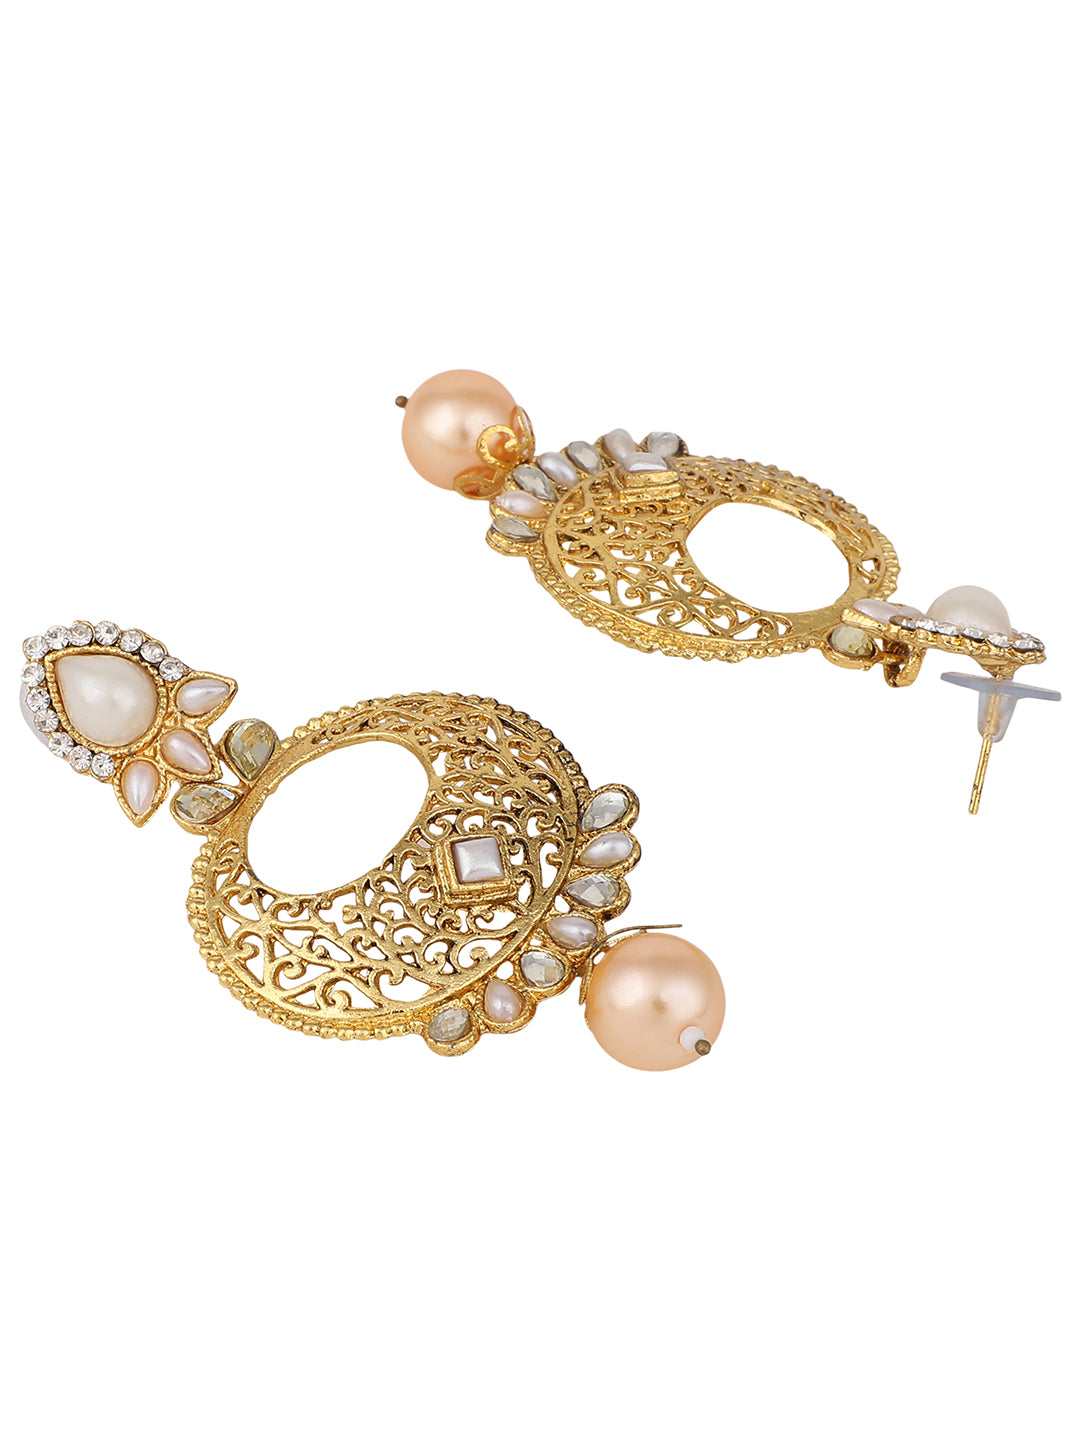 Women's Gold Tone Contemporary White Stone and Pearl Brass Chandbali Earring - Anikas Creation